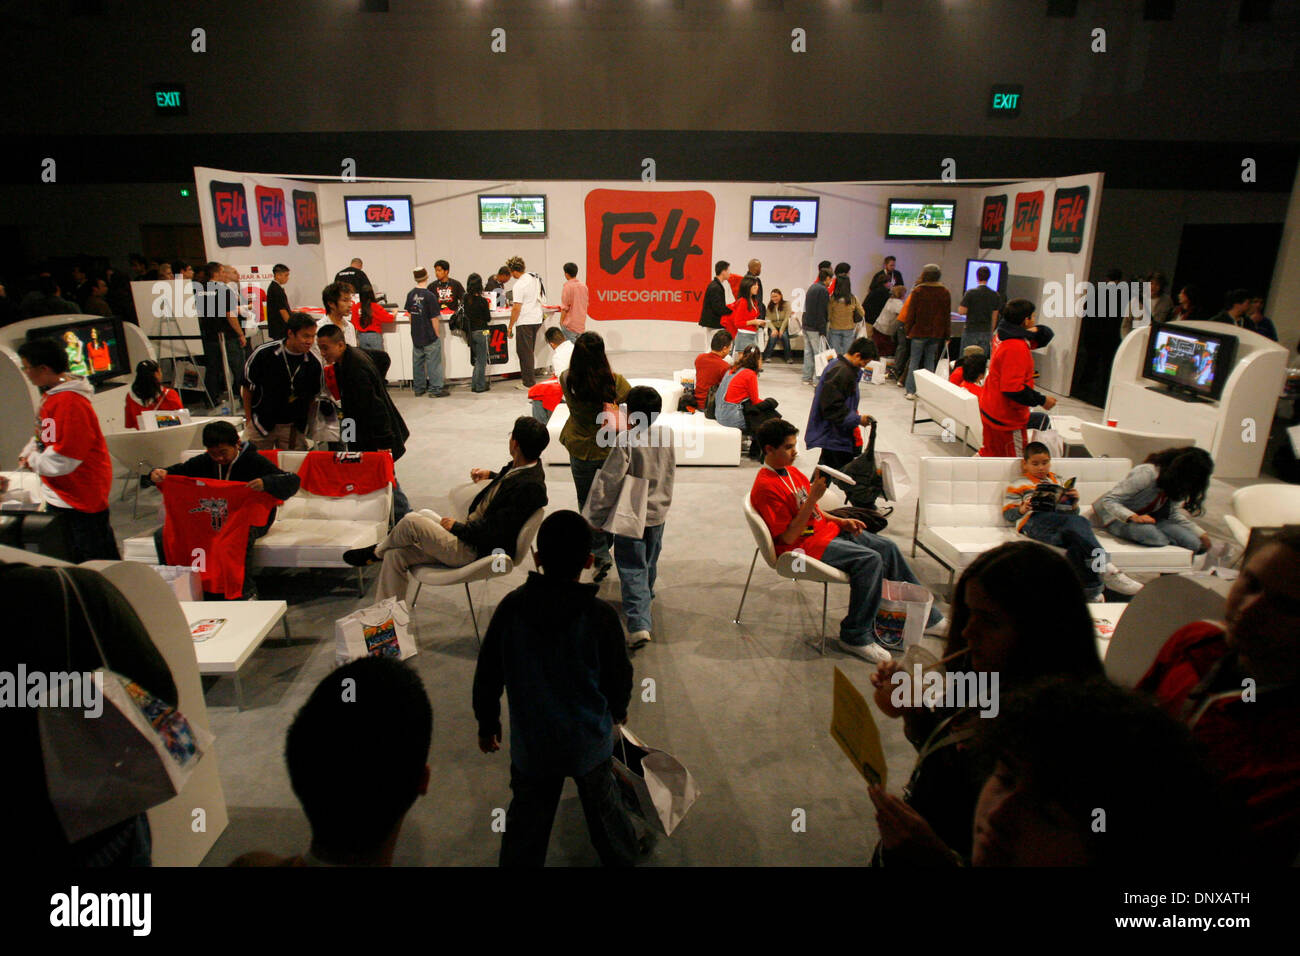 Dec 03, 2005; San Francisco, CA, USA; At the height of the Holiday shopping season, the $36 billion gaming industry promoted its latest products and equipment at the G.A.M.E. PlayLive event at San Francisco's Moscone Center. An entrance fee gave visitors unlimited access to 700 games, layed on Sony PSP, XBox360, PC's and cell phones. Mandatory Credit: Photo by Mike Fox/ZUMA Press.  Stock Photo